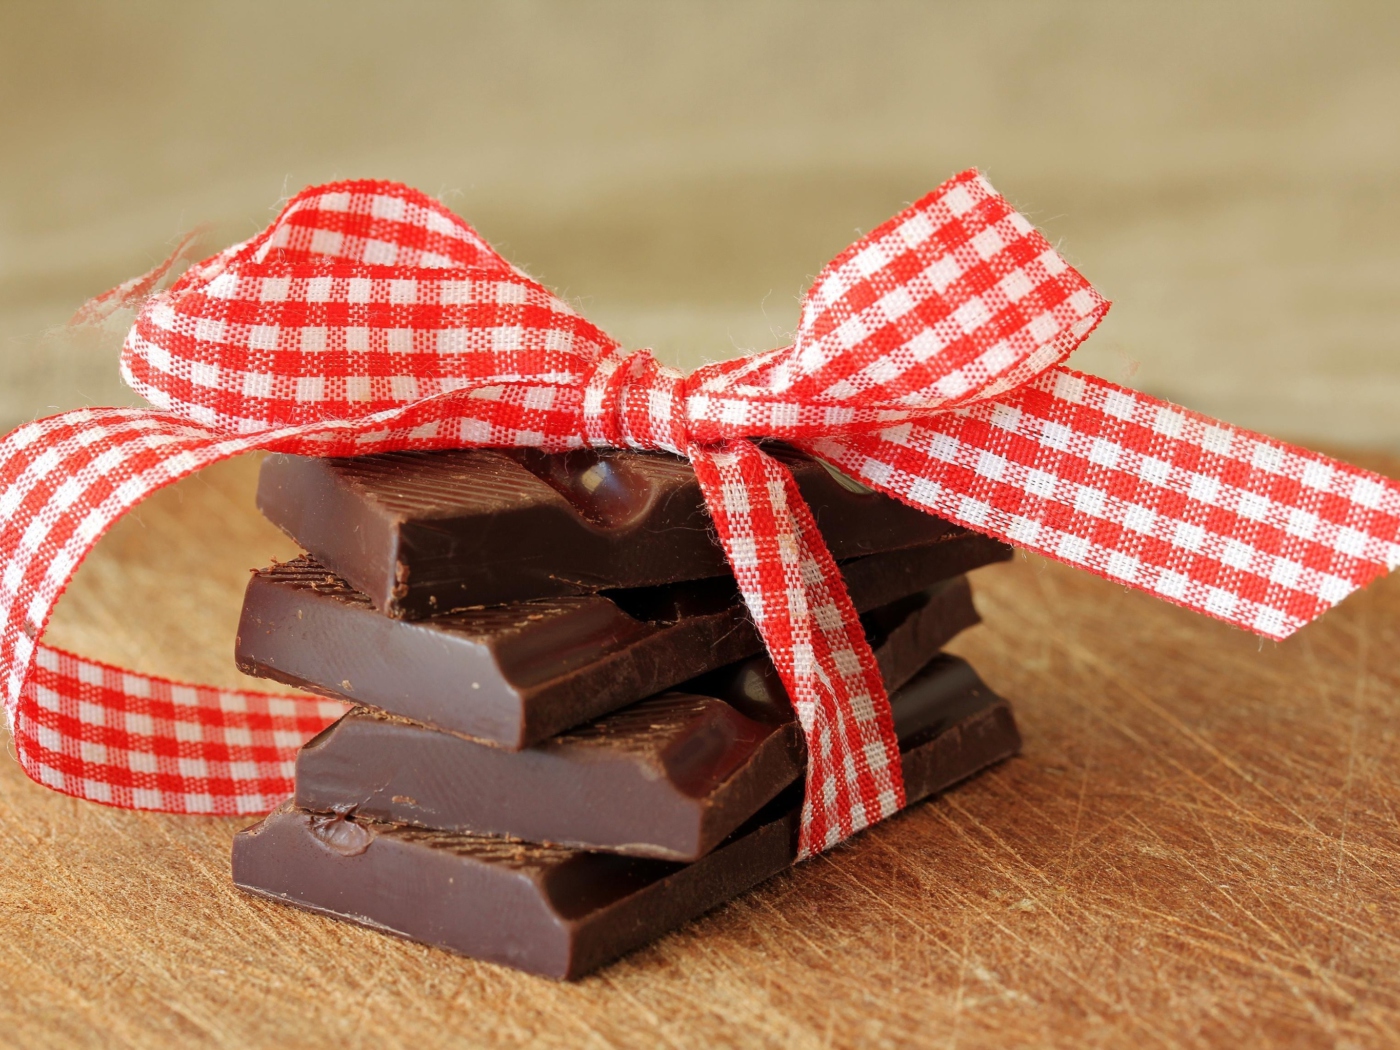 Chocolate And Red Bow wallpaper 1400x1050